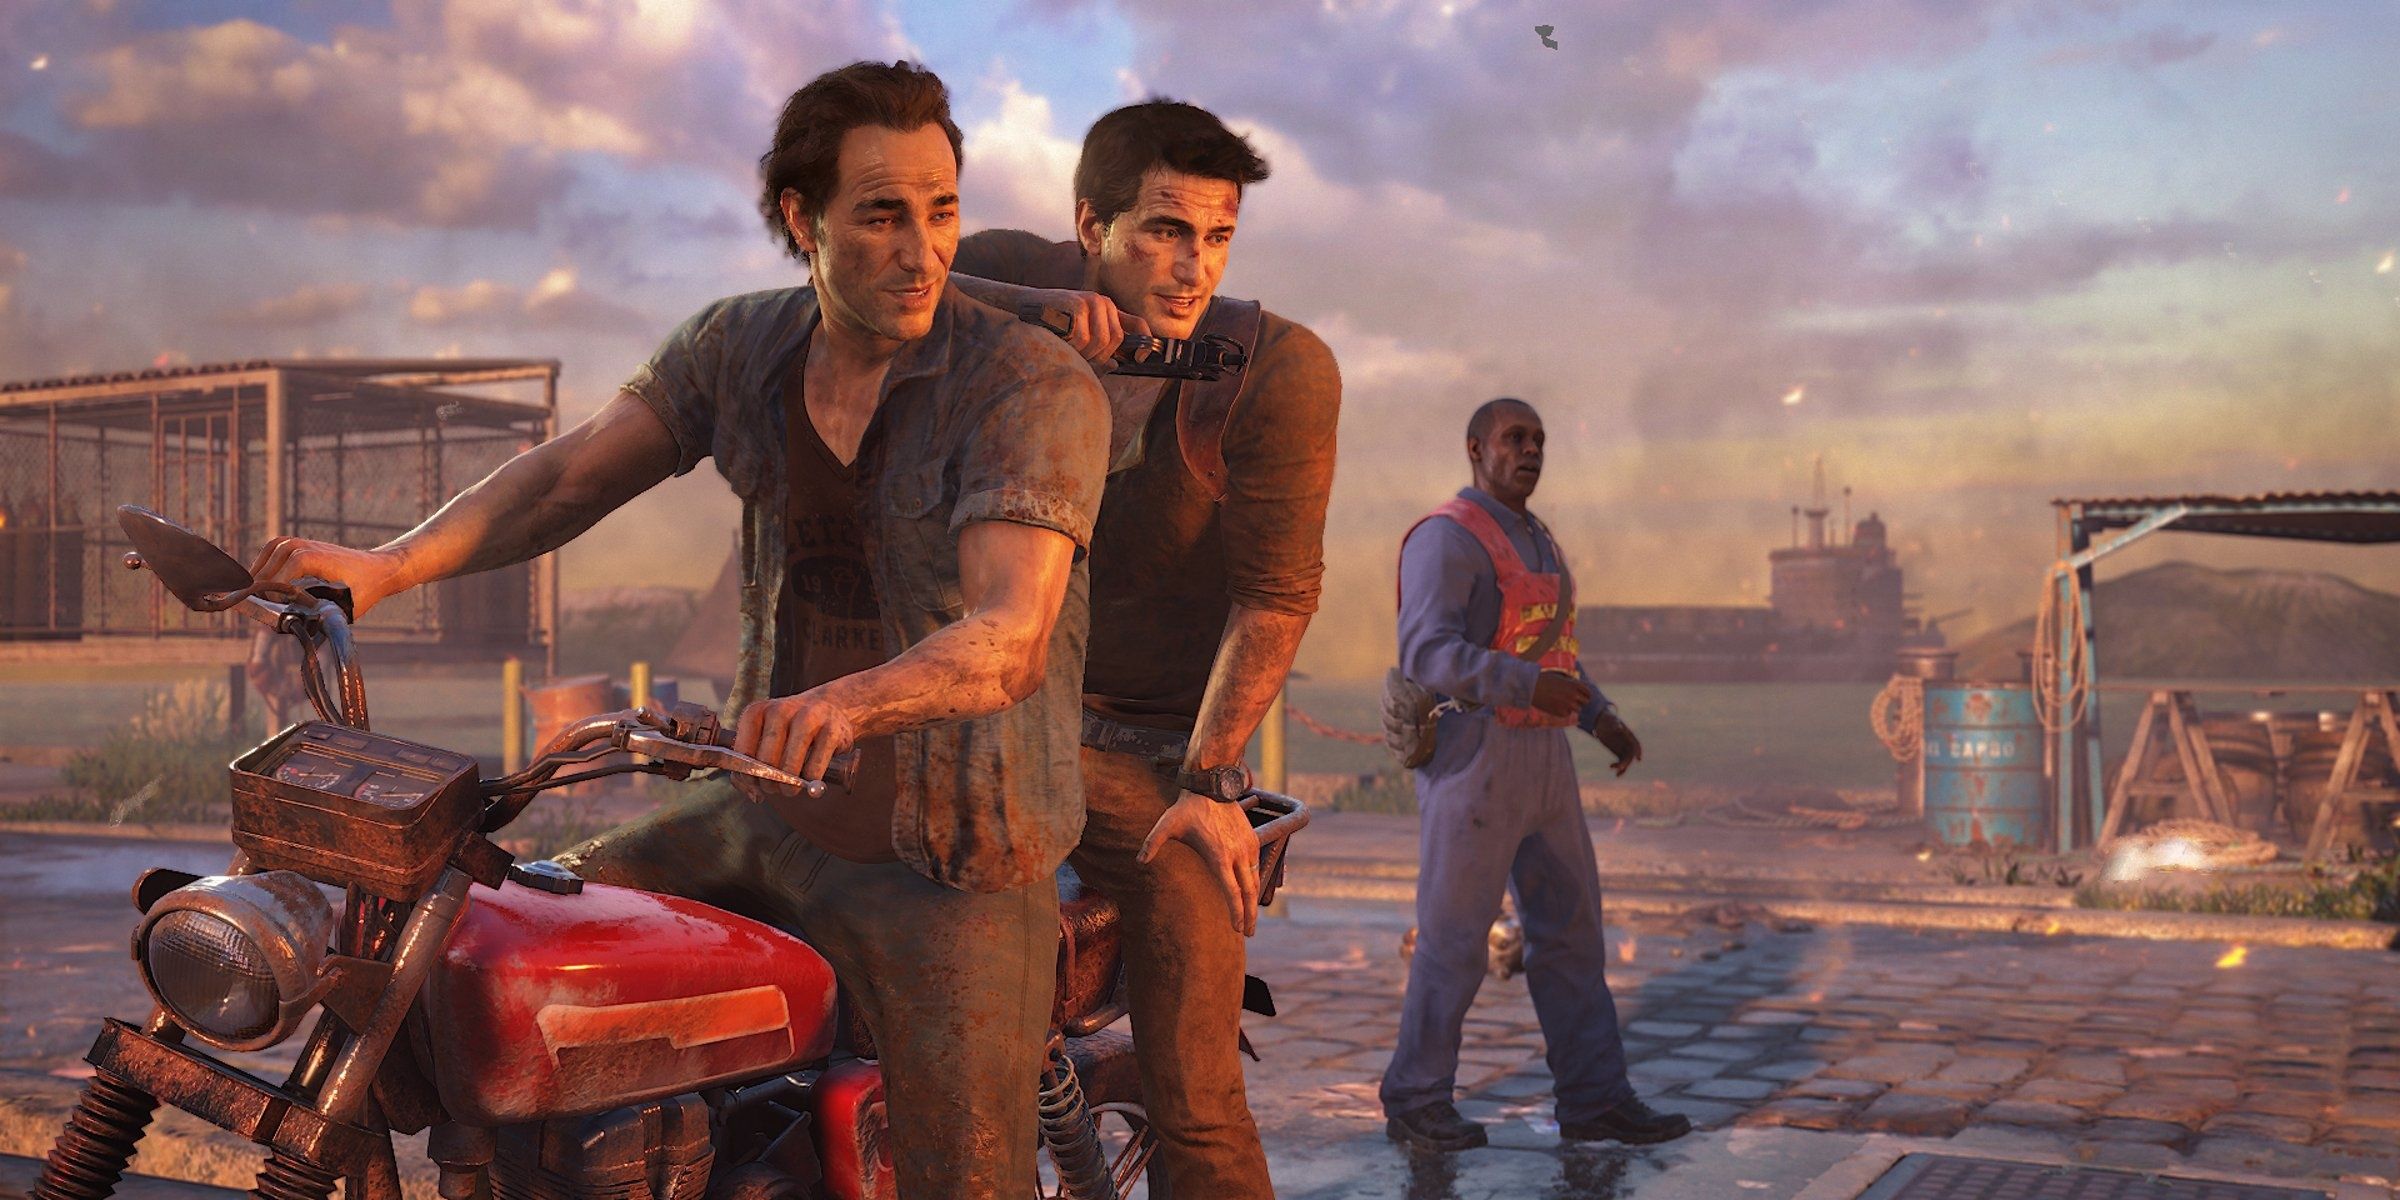 A screenshot showing Nate and his brother on a bike in Uncharted 4: A Thief's End